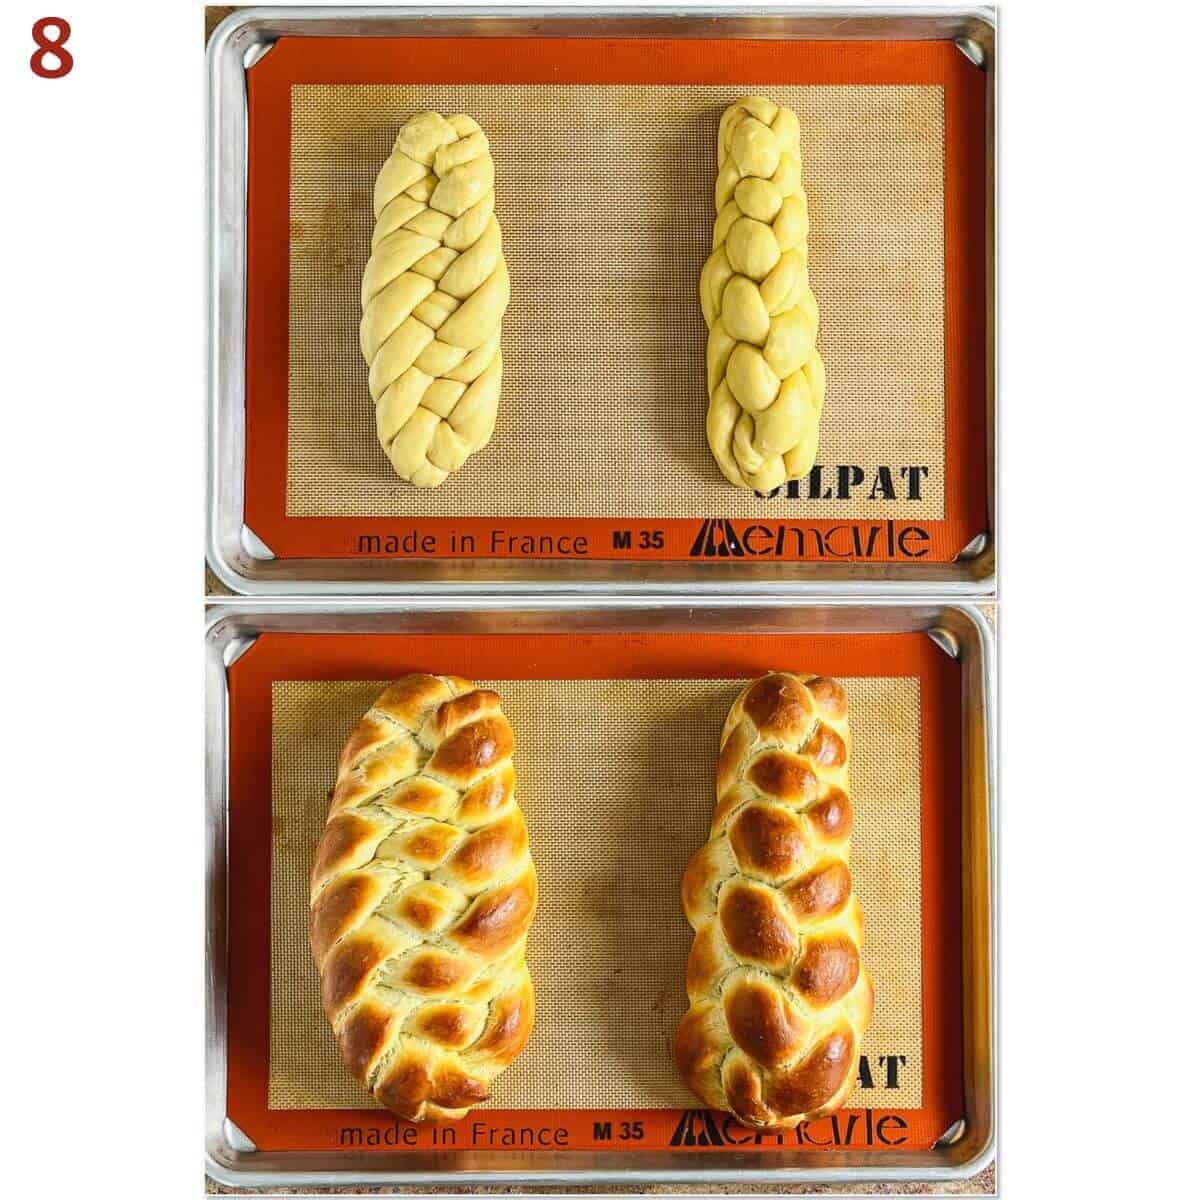 Six strand challahs on a baking pan before and after baking.